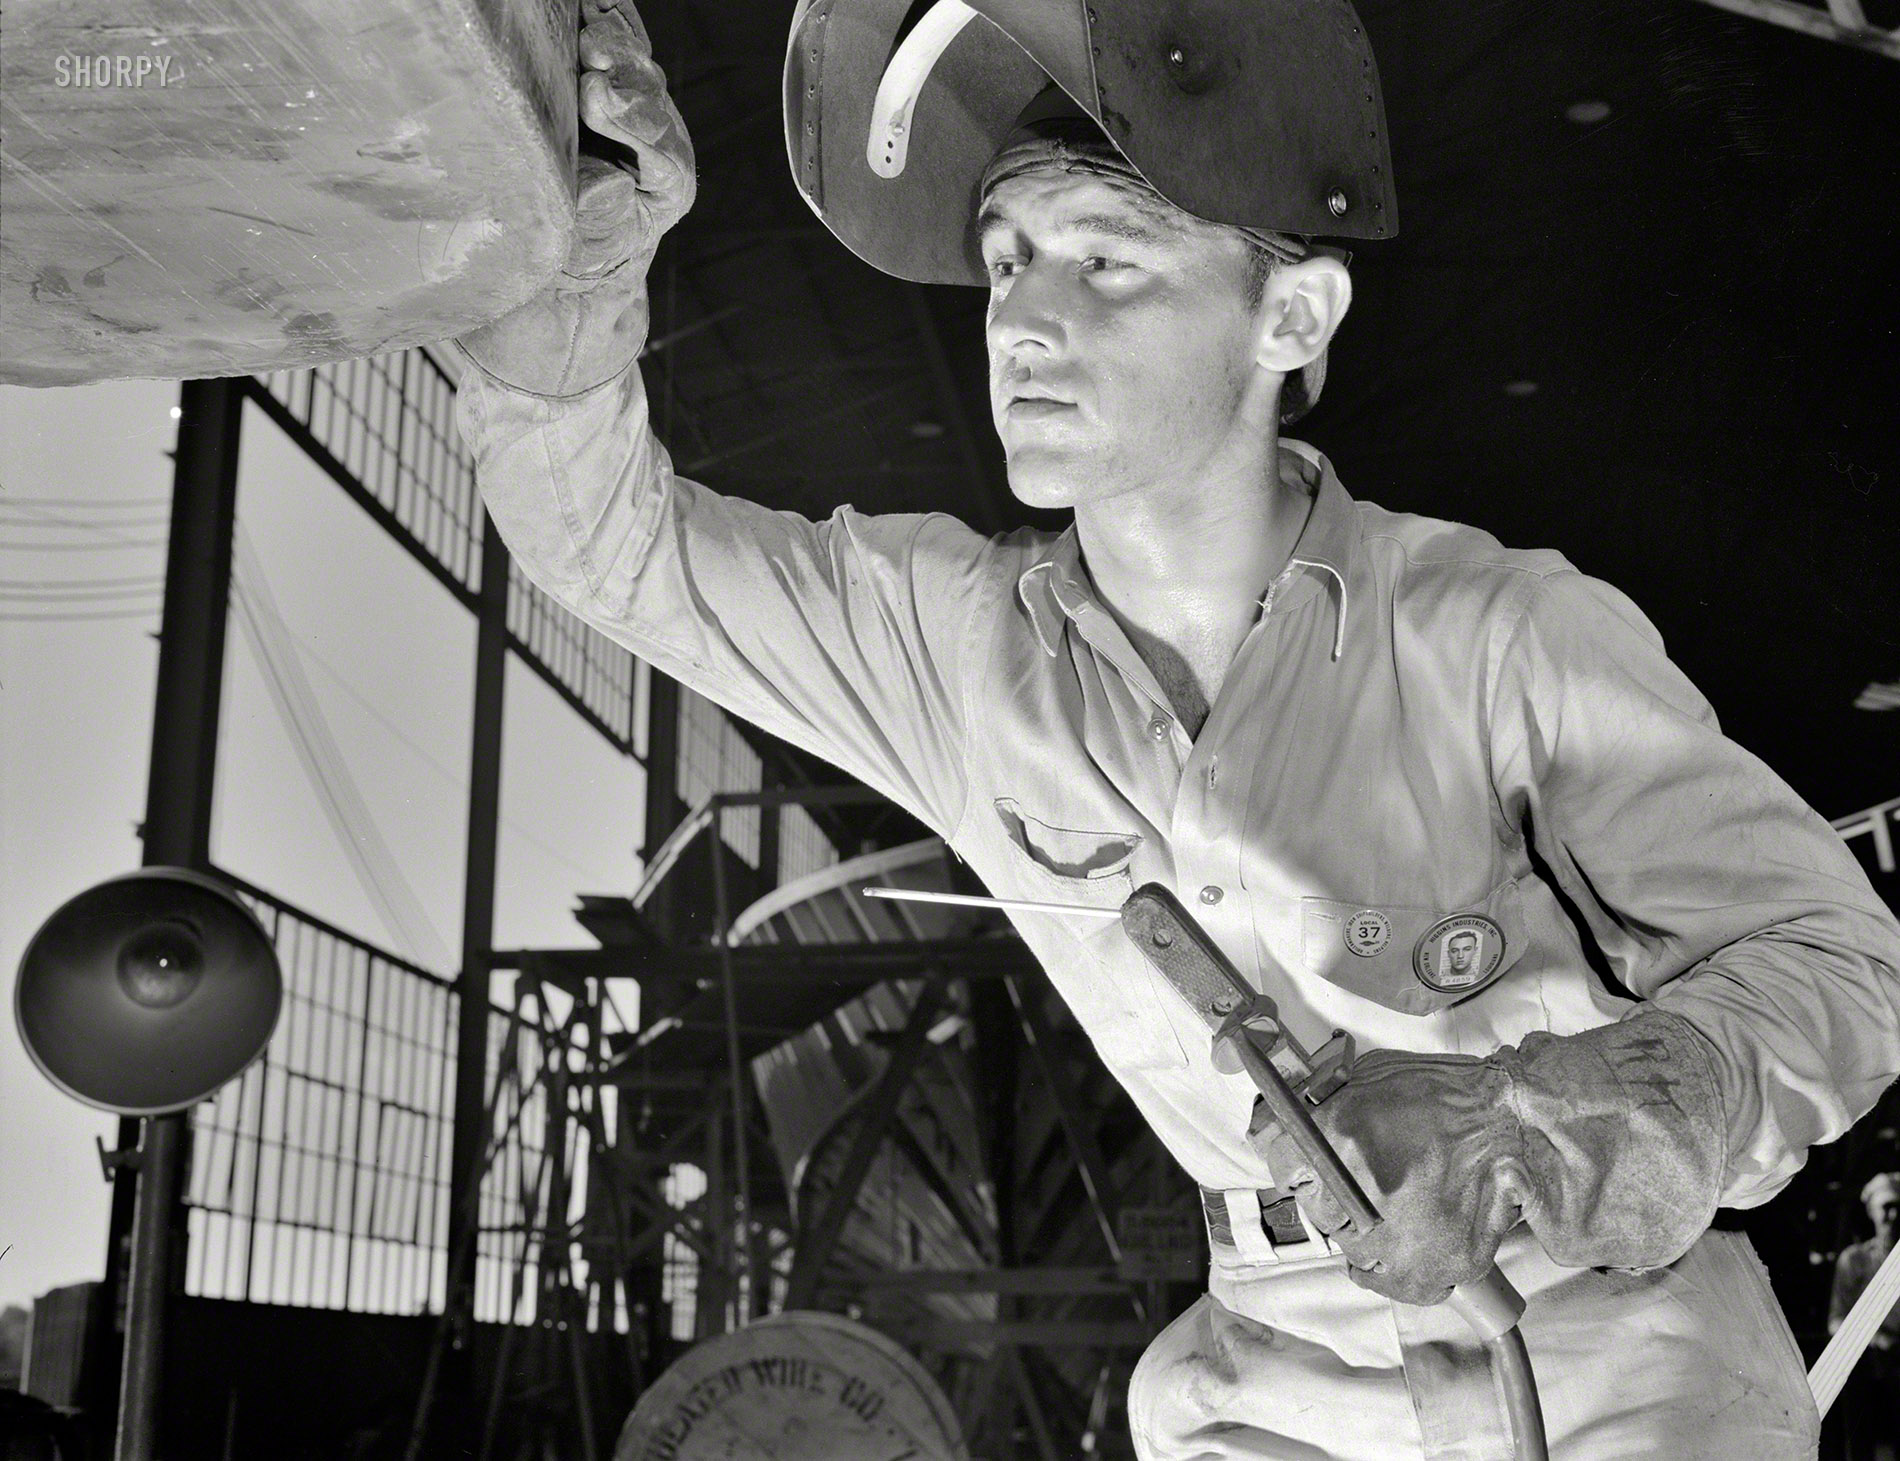 July 1942. "An electric arc welder at a large Southern boatyard examines a bead he has just run on a steel ramp boat which will be used in making beach landings of men, tanks, and other equipment on hostile shores. Higgins Industries, New Orleans." Photo by Howard Hollem, Office of War Information. View full size.